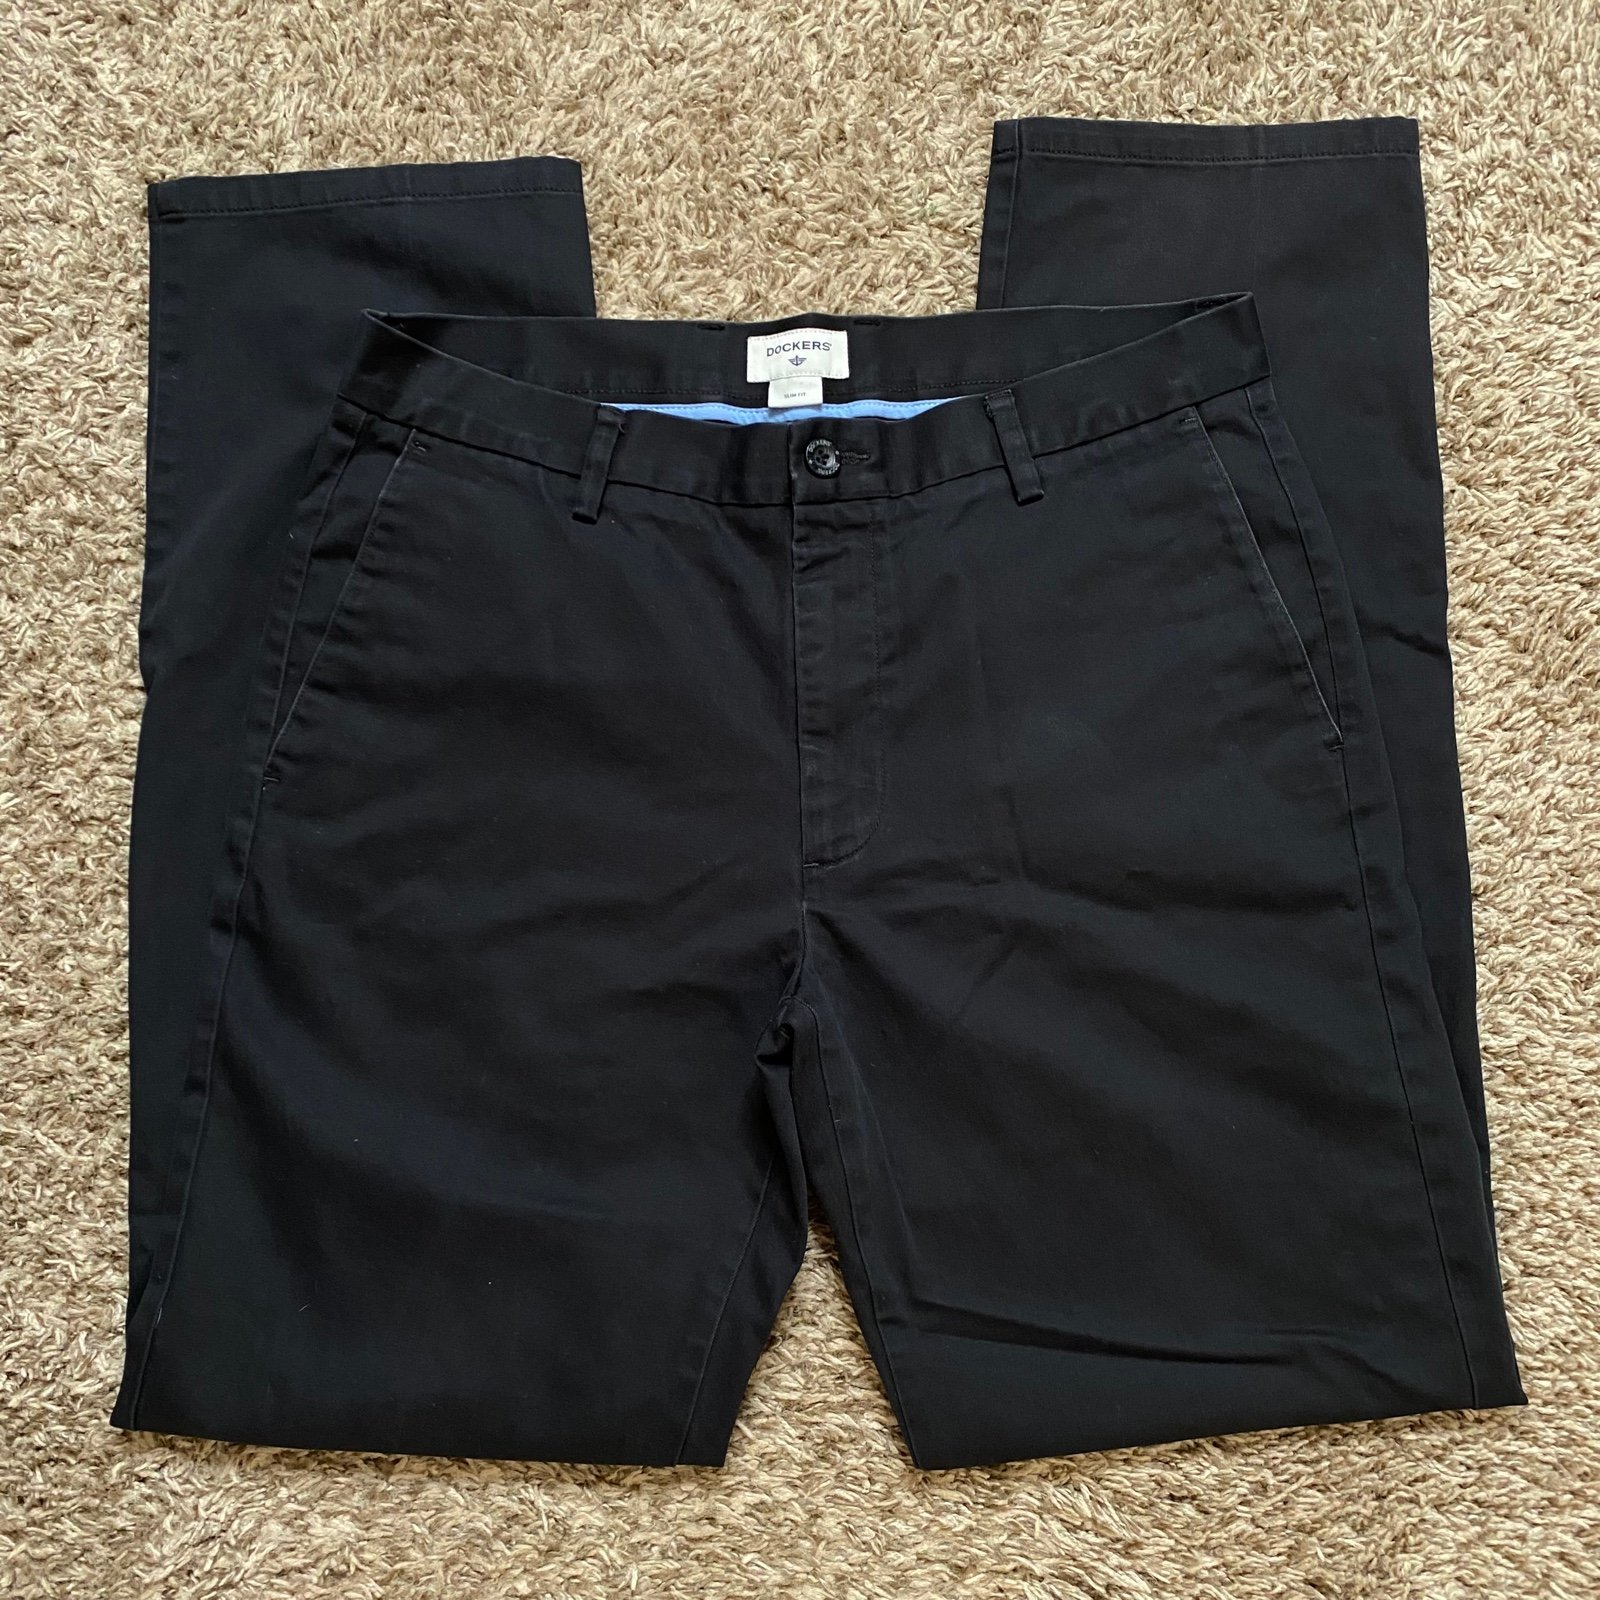 cheapest place to buy  Dockers pants o7fkLOIl4 online store